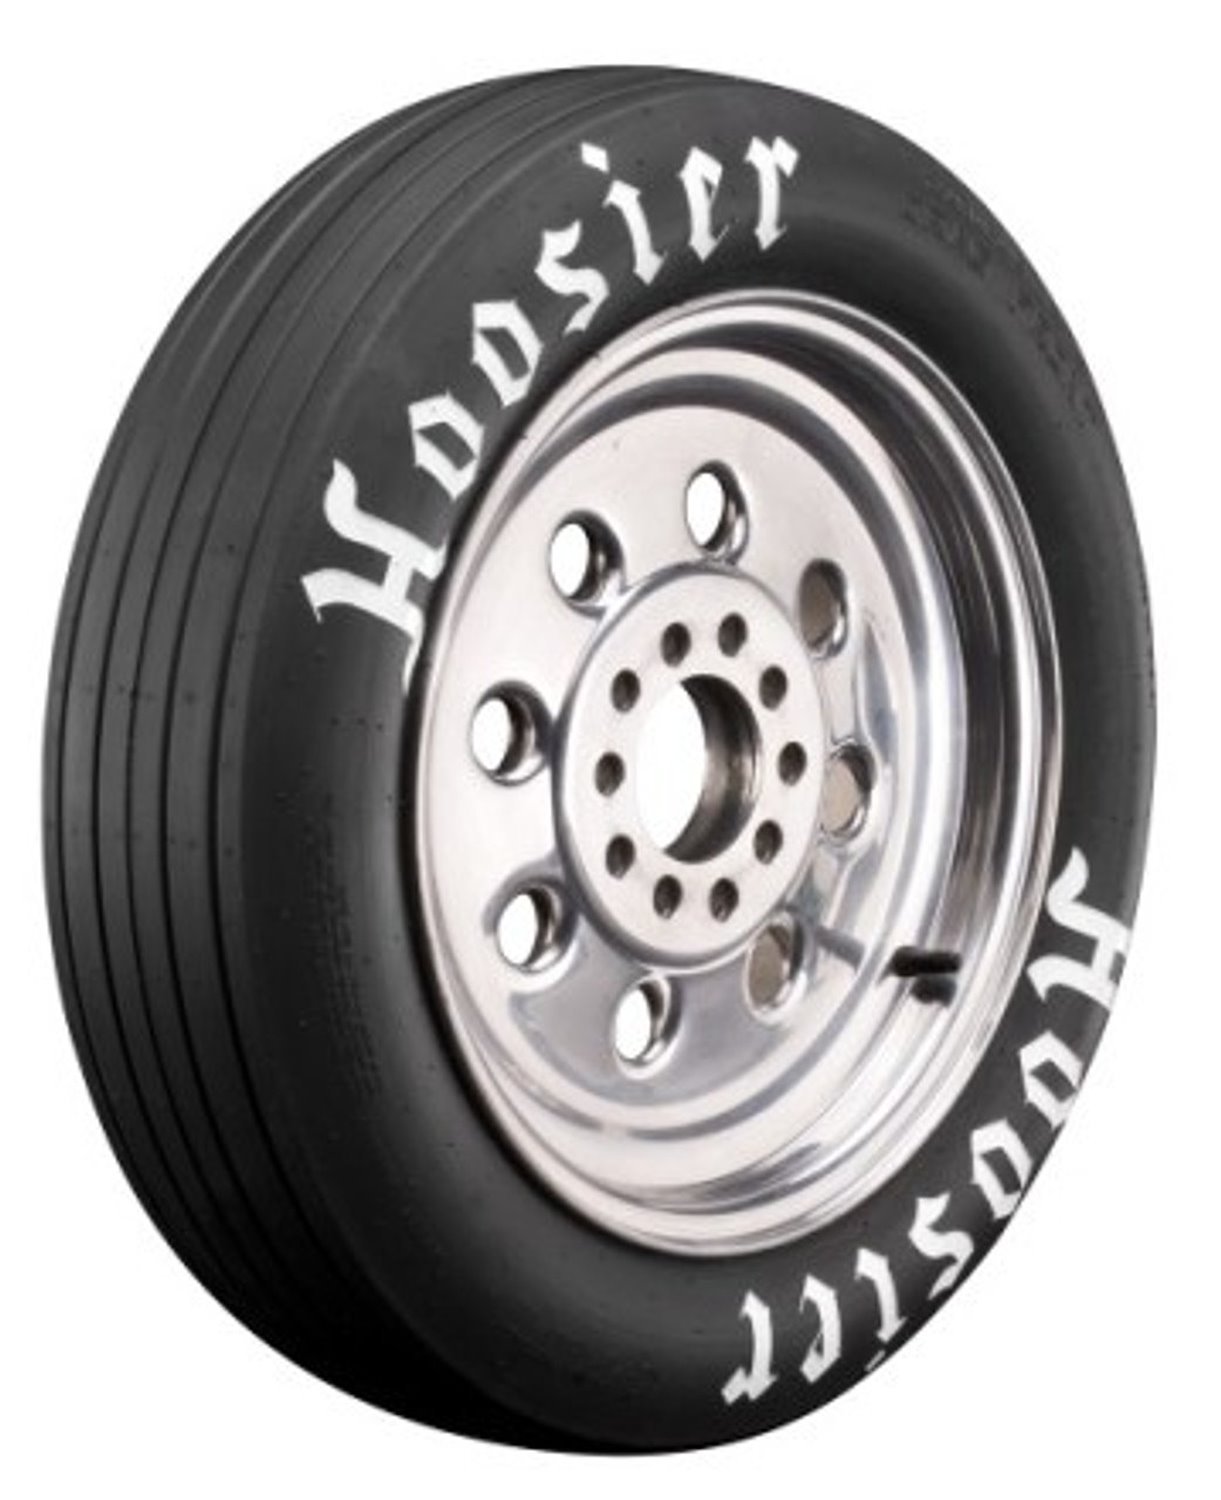 Front Drag Tire Tire Size: 26x4.5-15